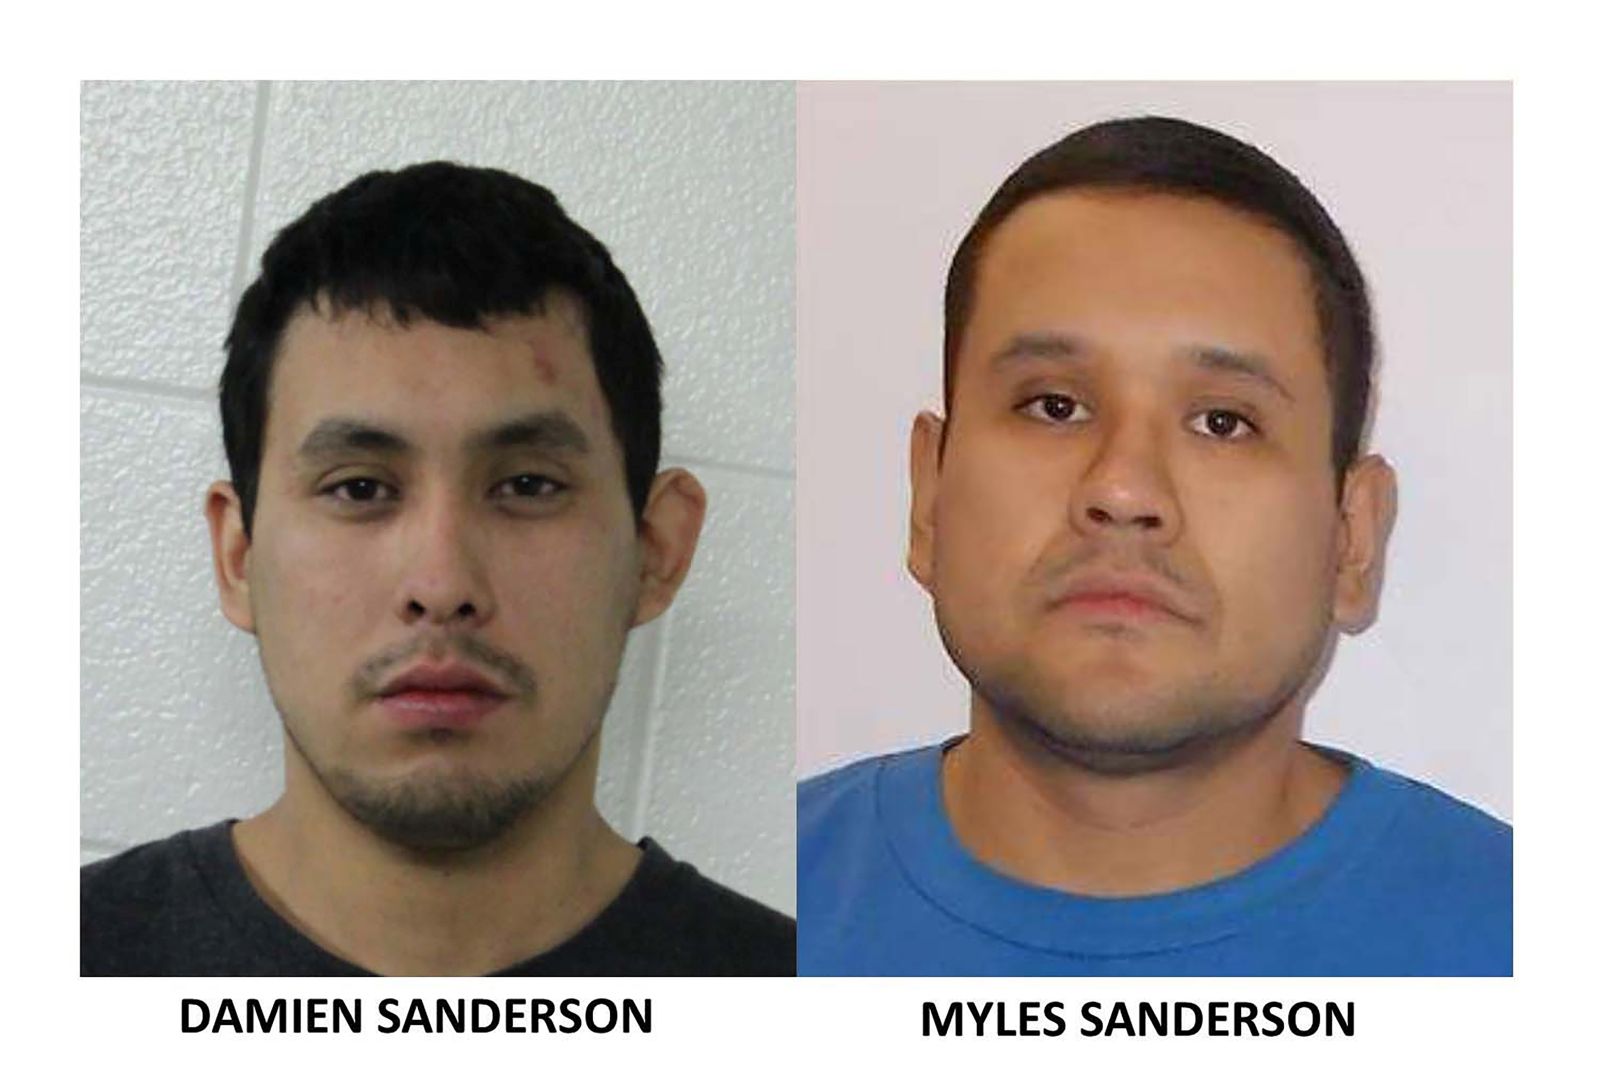 epa10160300 A handout combination photo made available by the Royal Canadian Mounted Police showing suspects Damien Sanderson (L) and Myles Sanderson (R) who are actively being sought by police in connection with stabbings in the James Smith Cree Nation, Saskatchewan, Canada, 04 September 2022.  EPA/ROYAL CANADIAN MOUNTED POLICE / HANDOUT EDITORIAL USE ONLY, NO SALES HANDOUT EDITORIAL USE ONLY/NO SALES